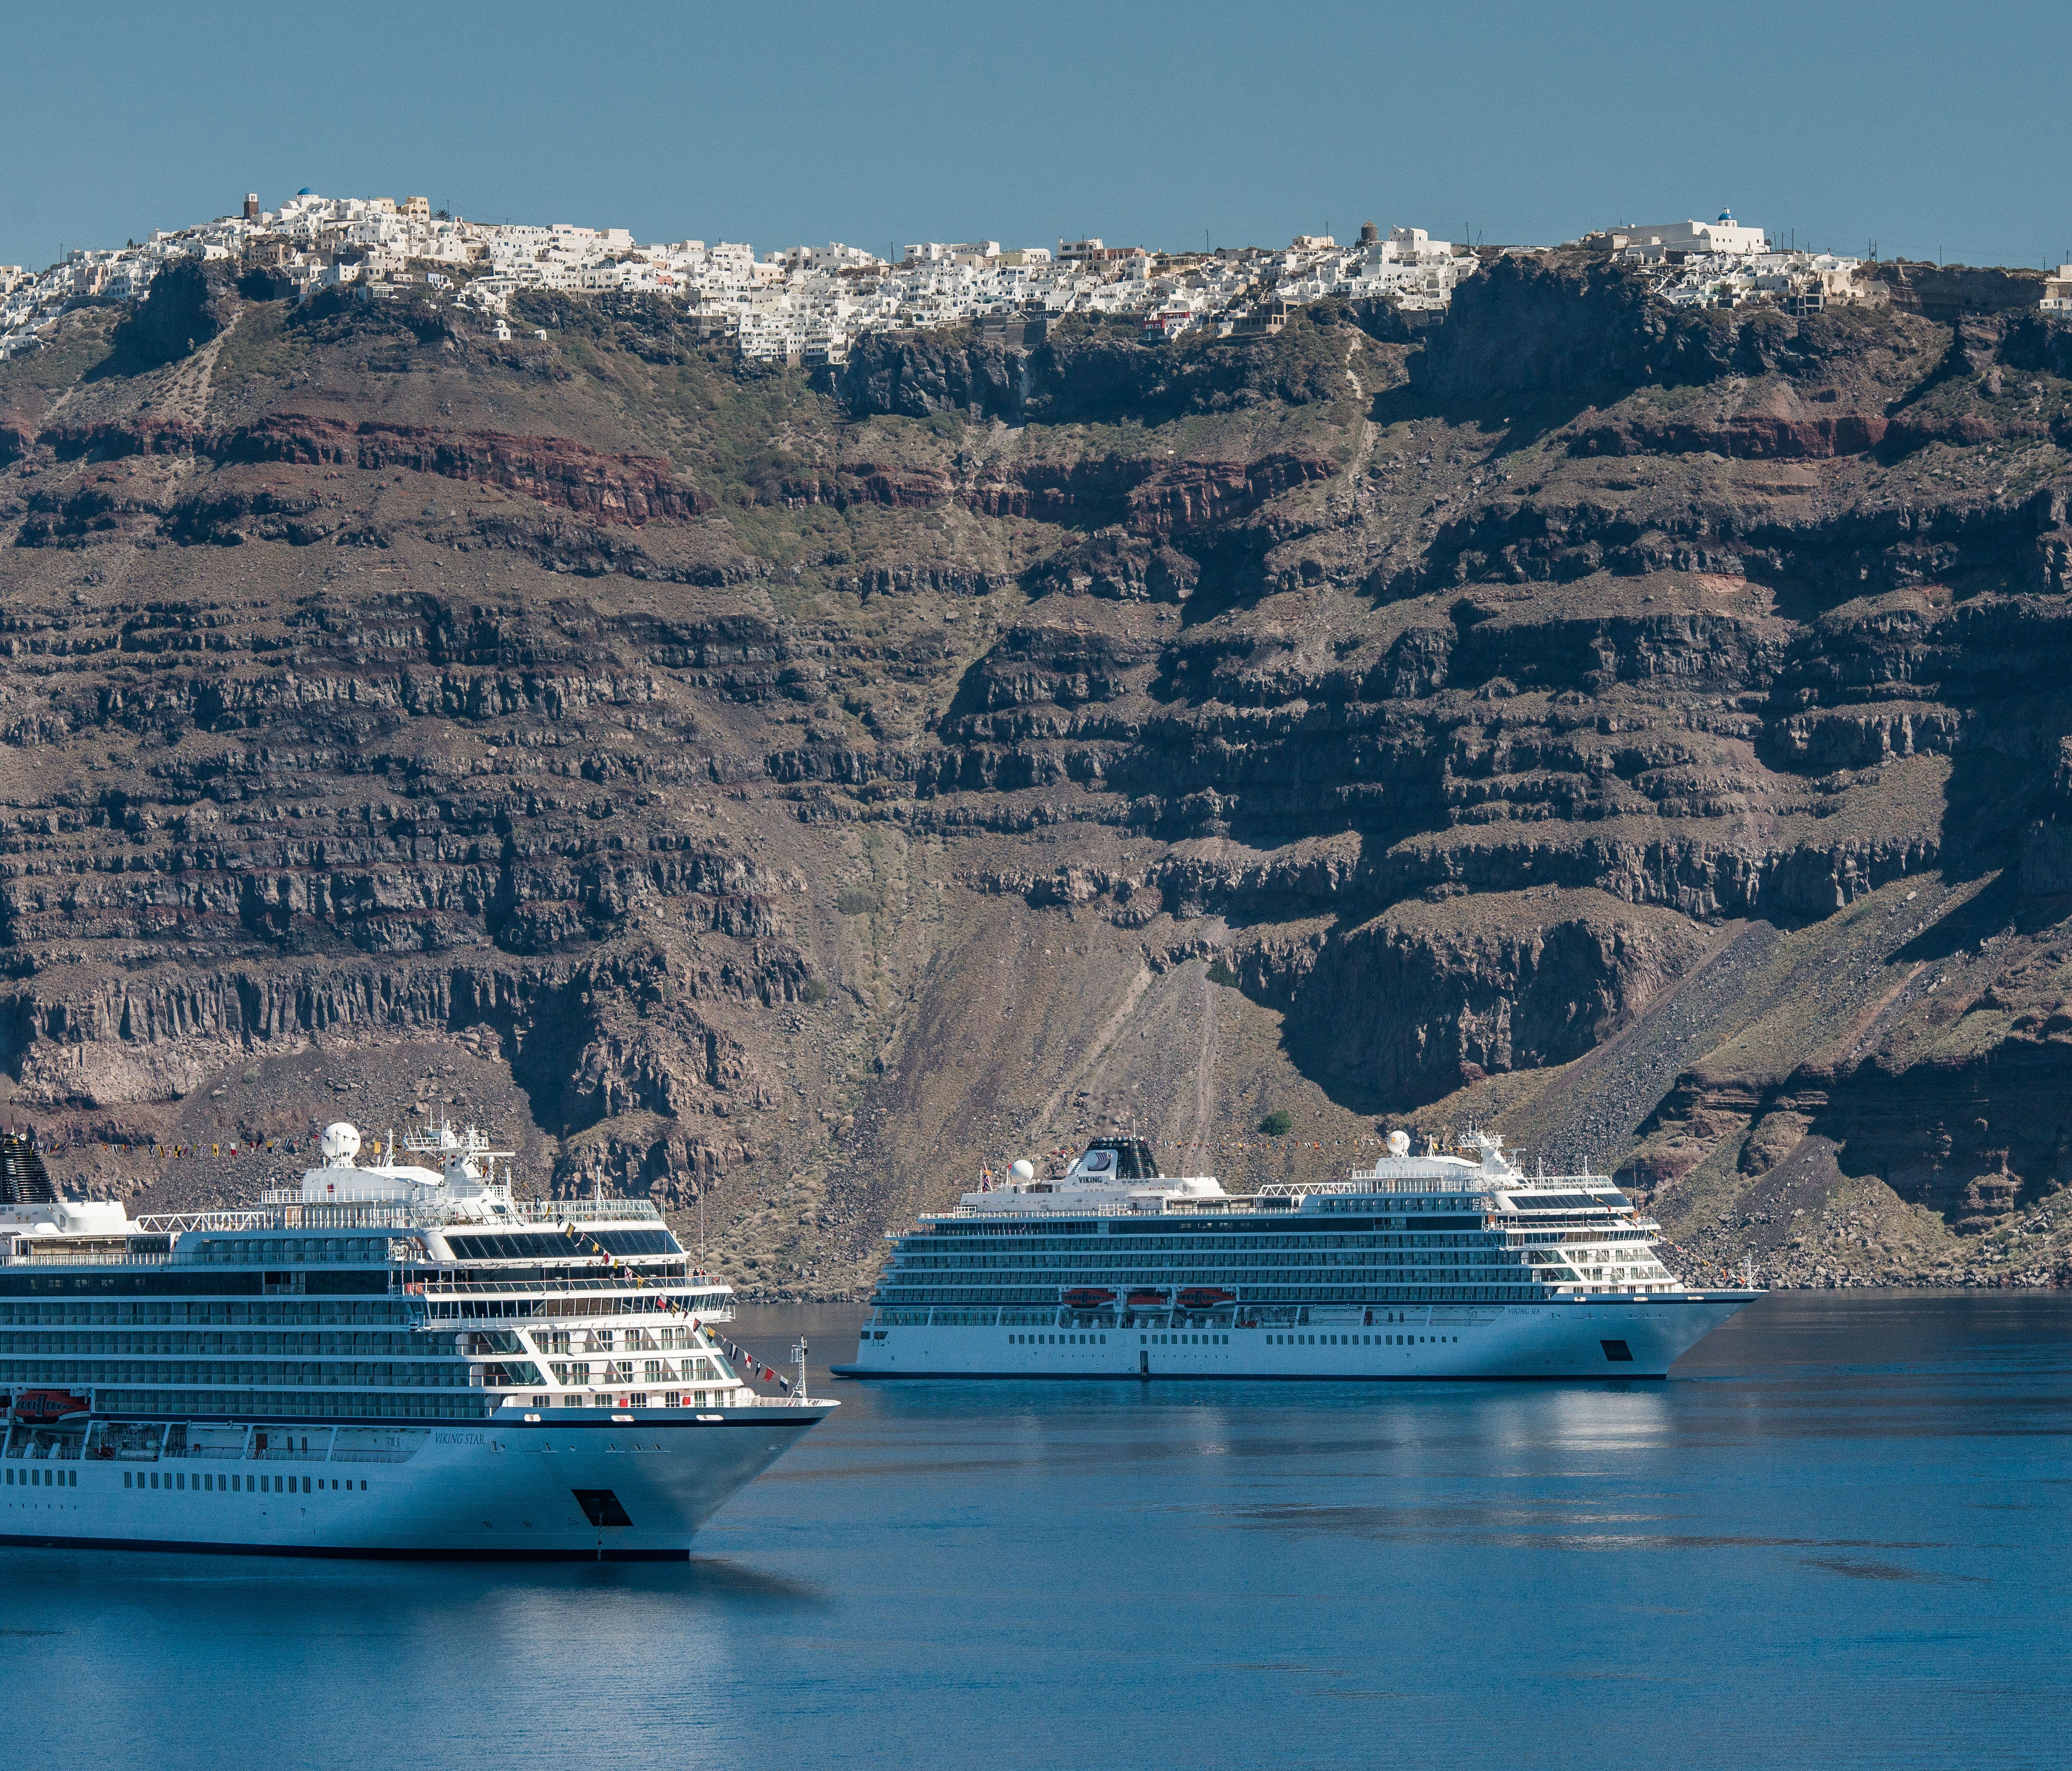 The Viking Sky will be a sister to the recently unveiled Viking Sea and Viking Star, shown here in Santorini. With a capacity for 930 passengers, the ships are modest in size as compared to many of the megaships being built today by mainstream cruise